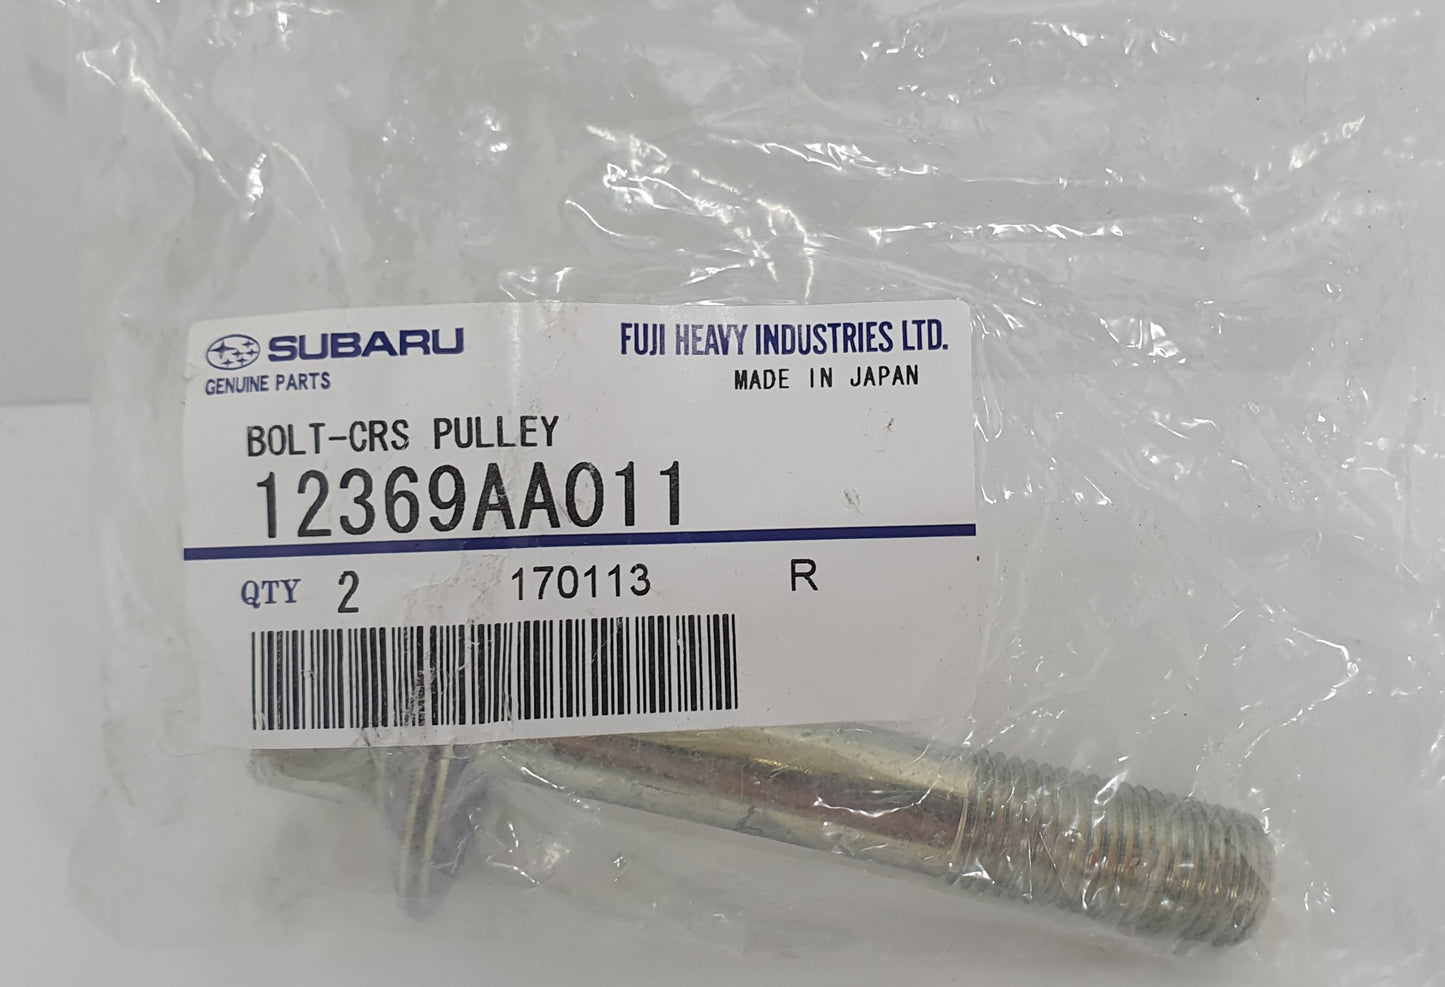 Genuine bolt CRS pulley 12369AA011